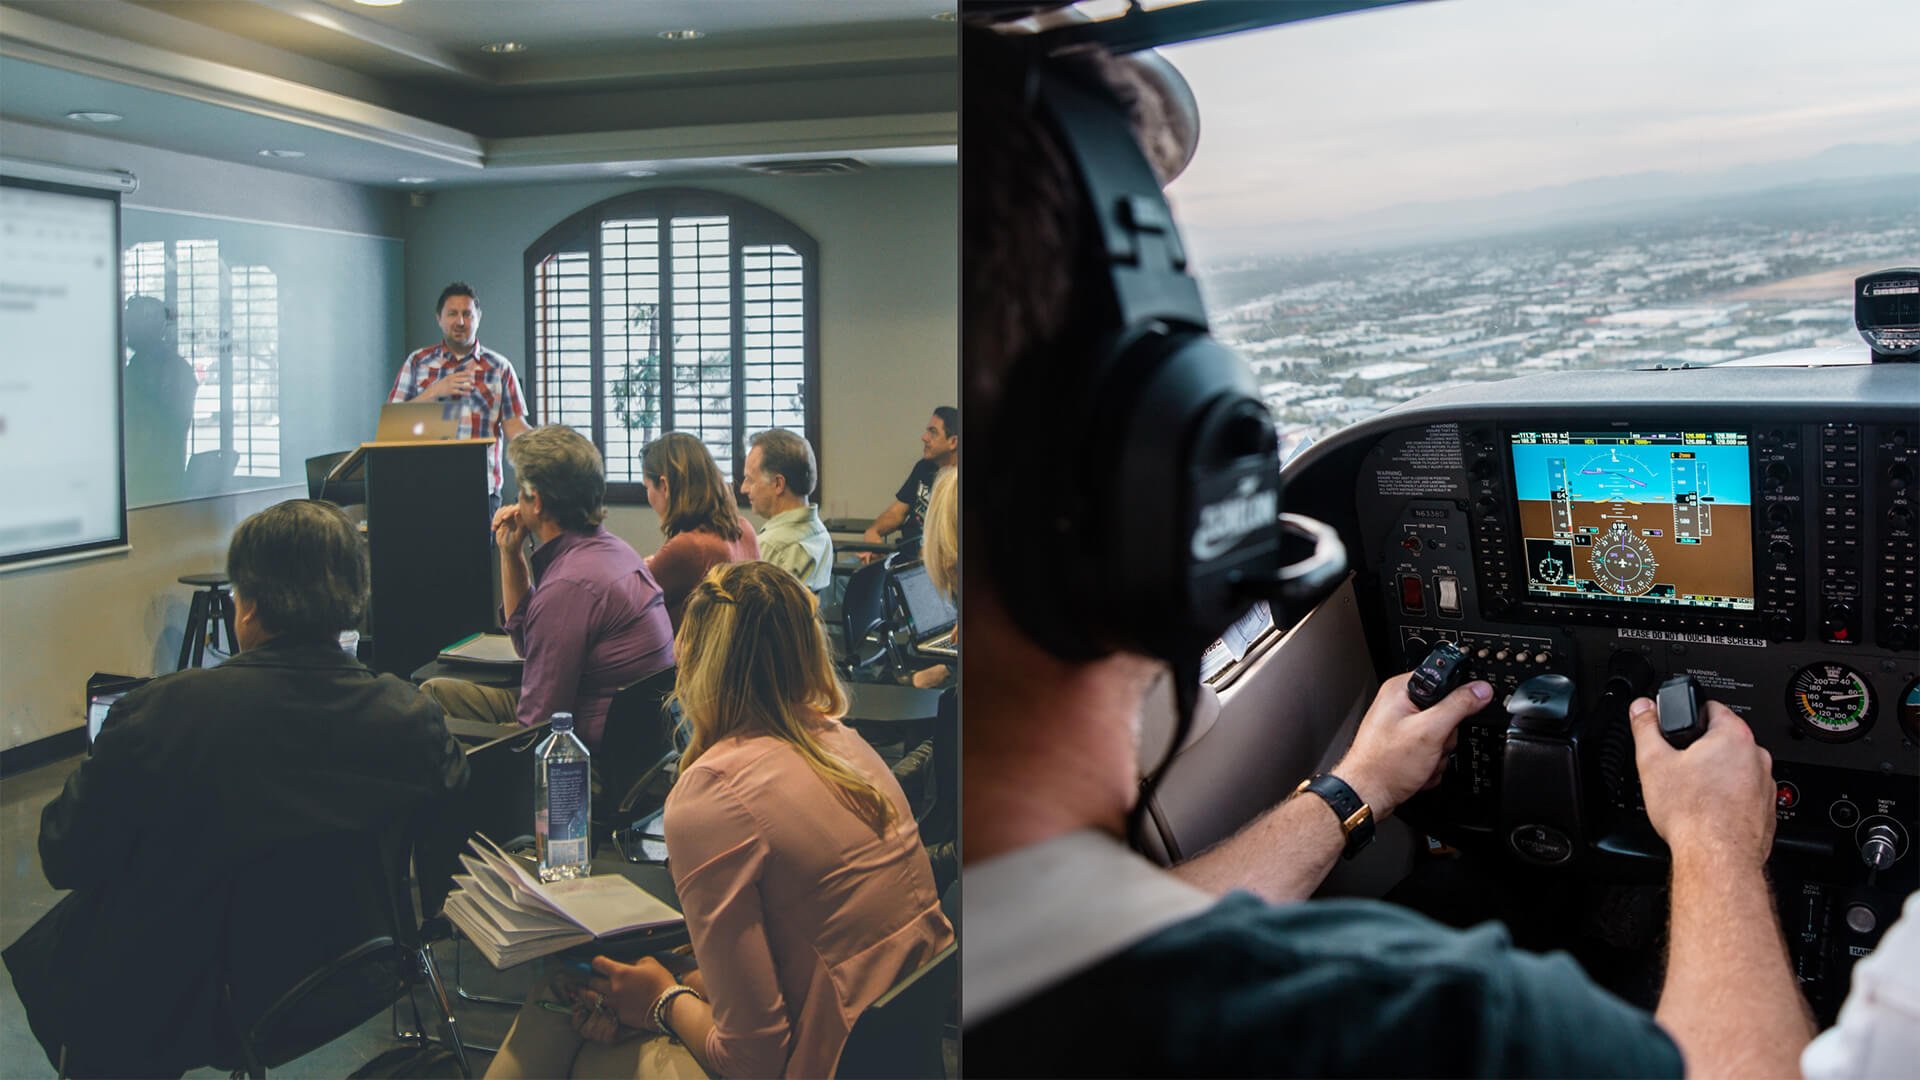 A collage with two images side-to-side showing a seminar given to an adult audience in a classroom and an over-the-shoulder view of a pilot in the cockpit flying an aircraft, used here as a metaphor that by continuously learning you can stay in control of your career.